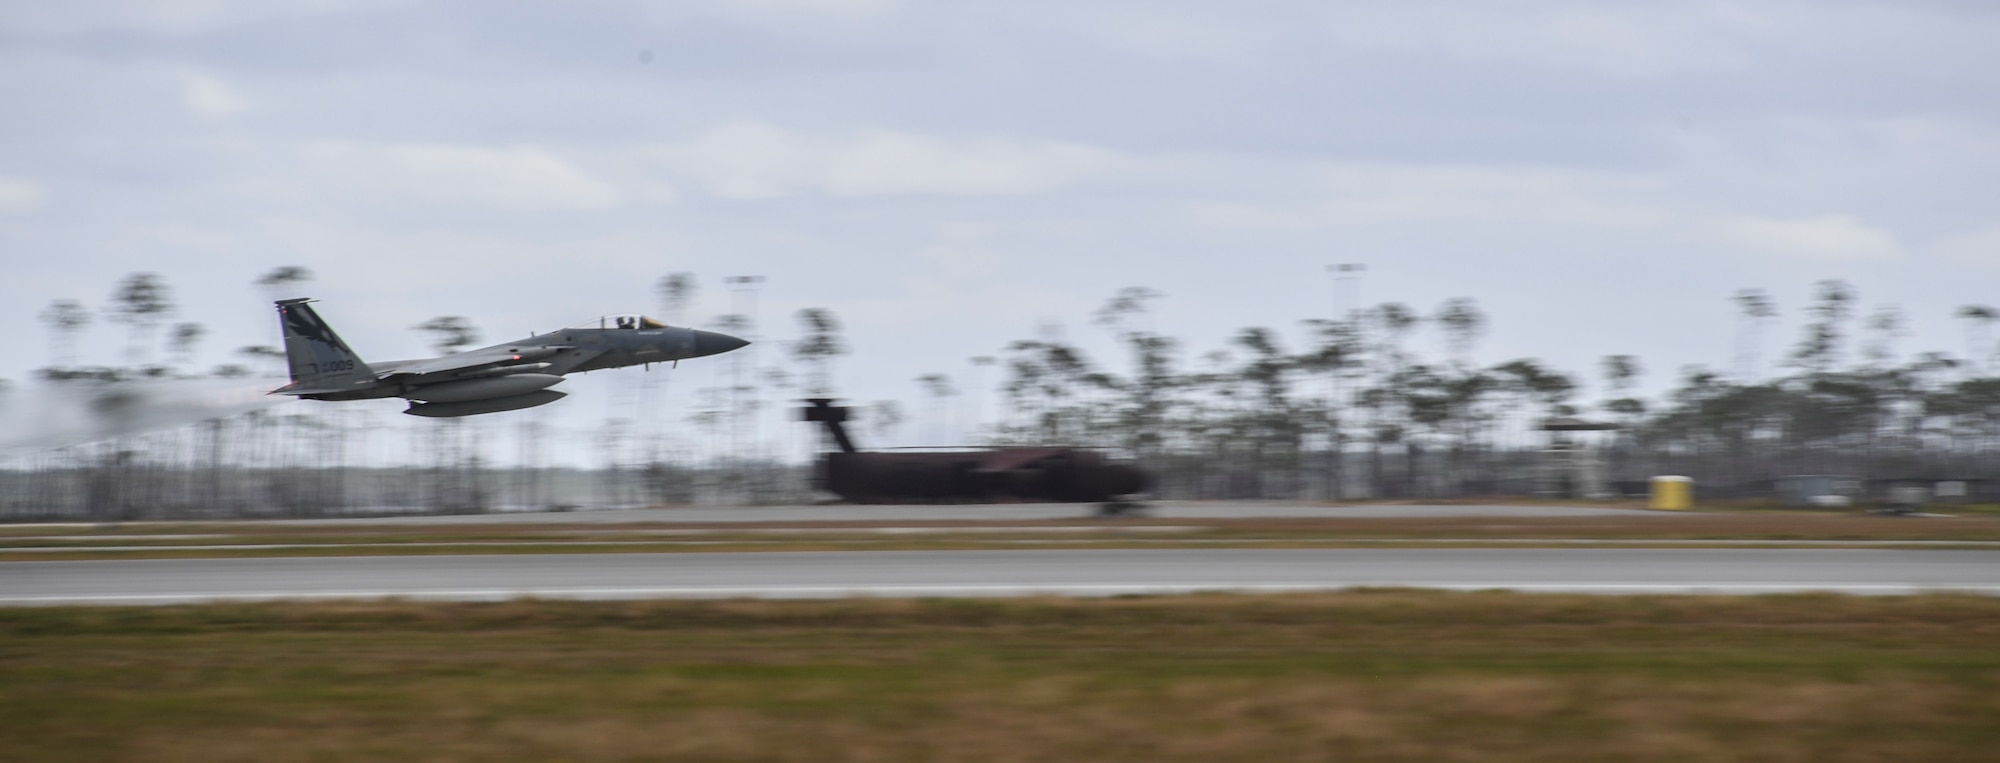 A U.S. Air Force F-15C Eagle fighter jet from the 194th Fighter Squadron, Fresno Air National Guard Base, California, takes off in support of exercise Checkered Flag, Tyndall Air Force Base, Florida, Nov. 10, 2020.